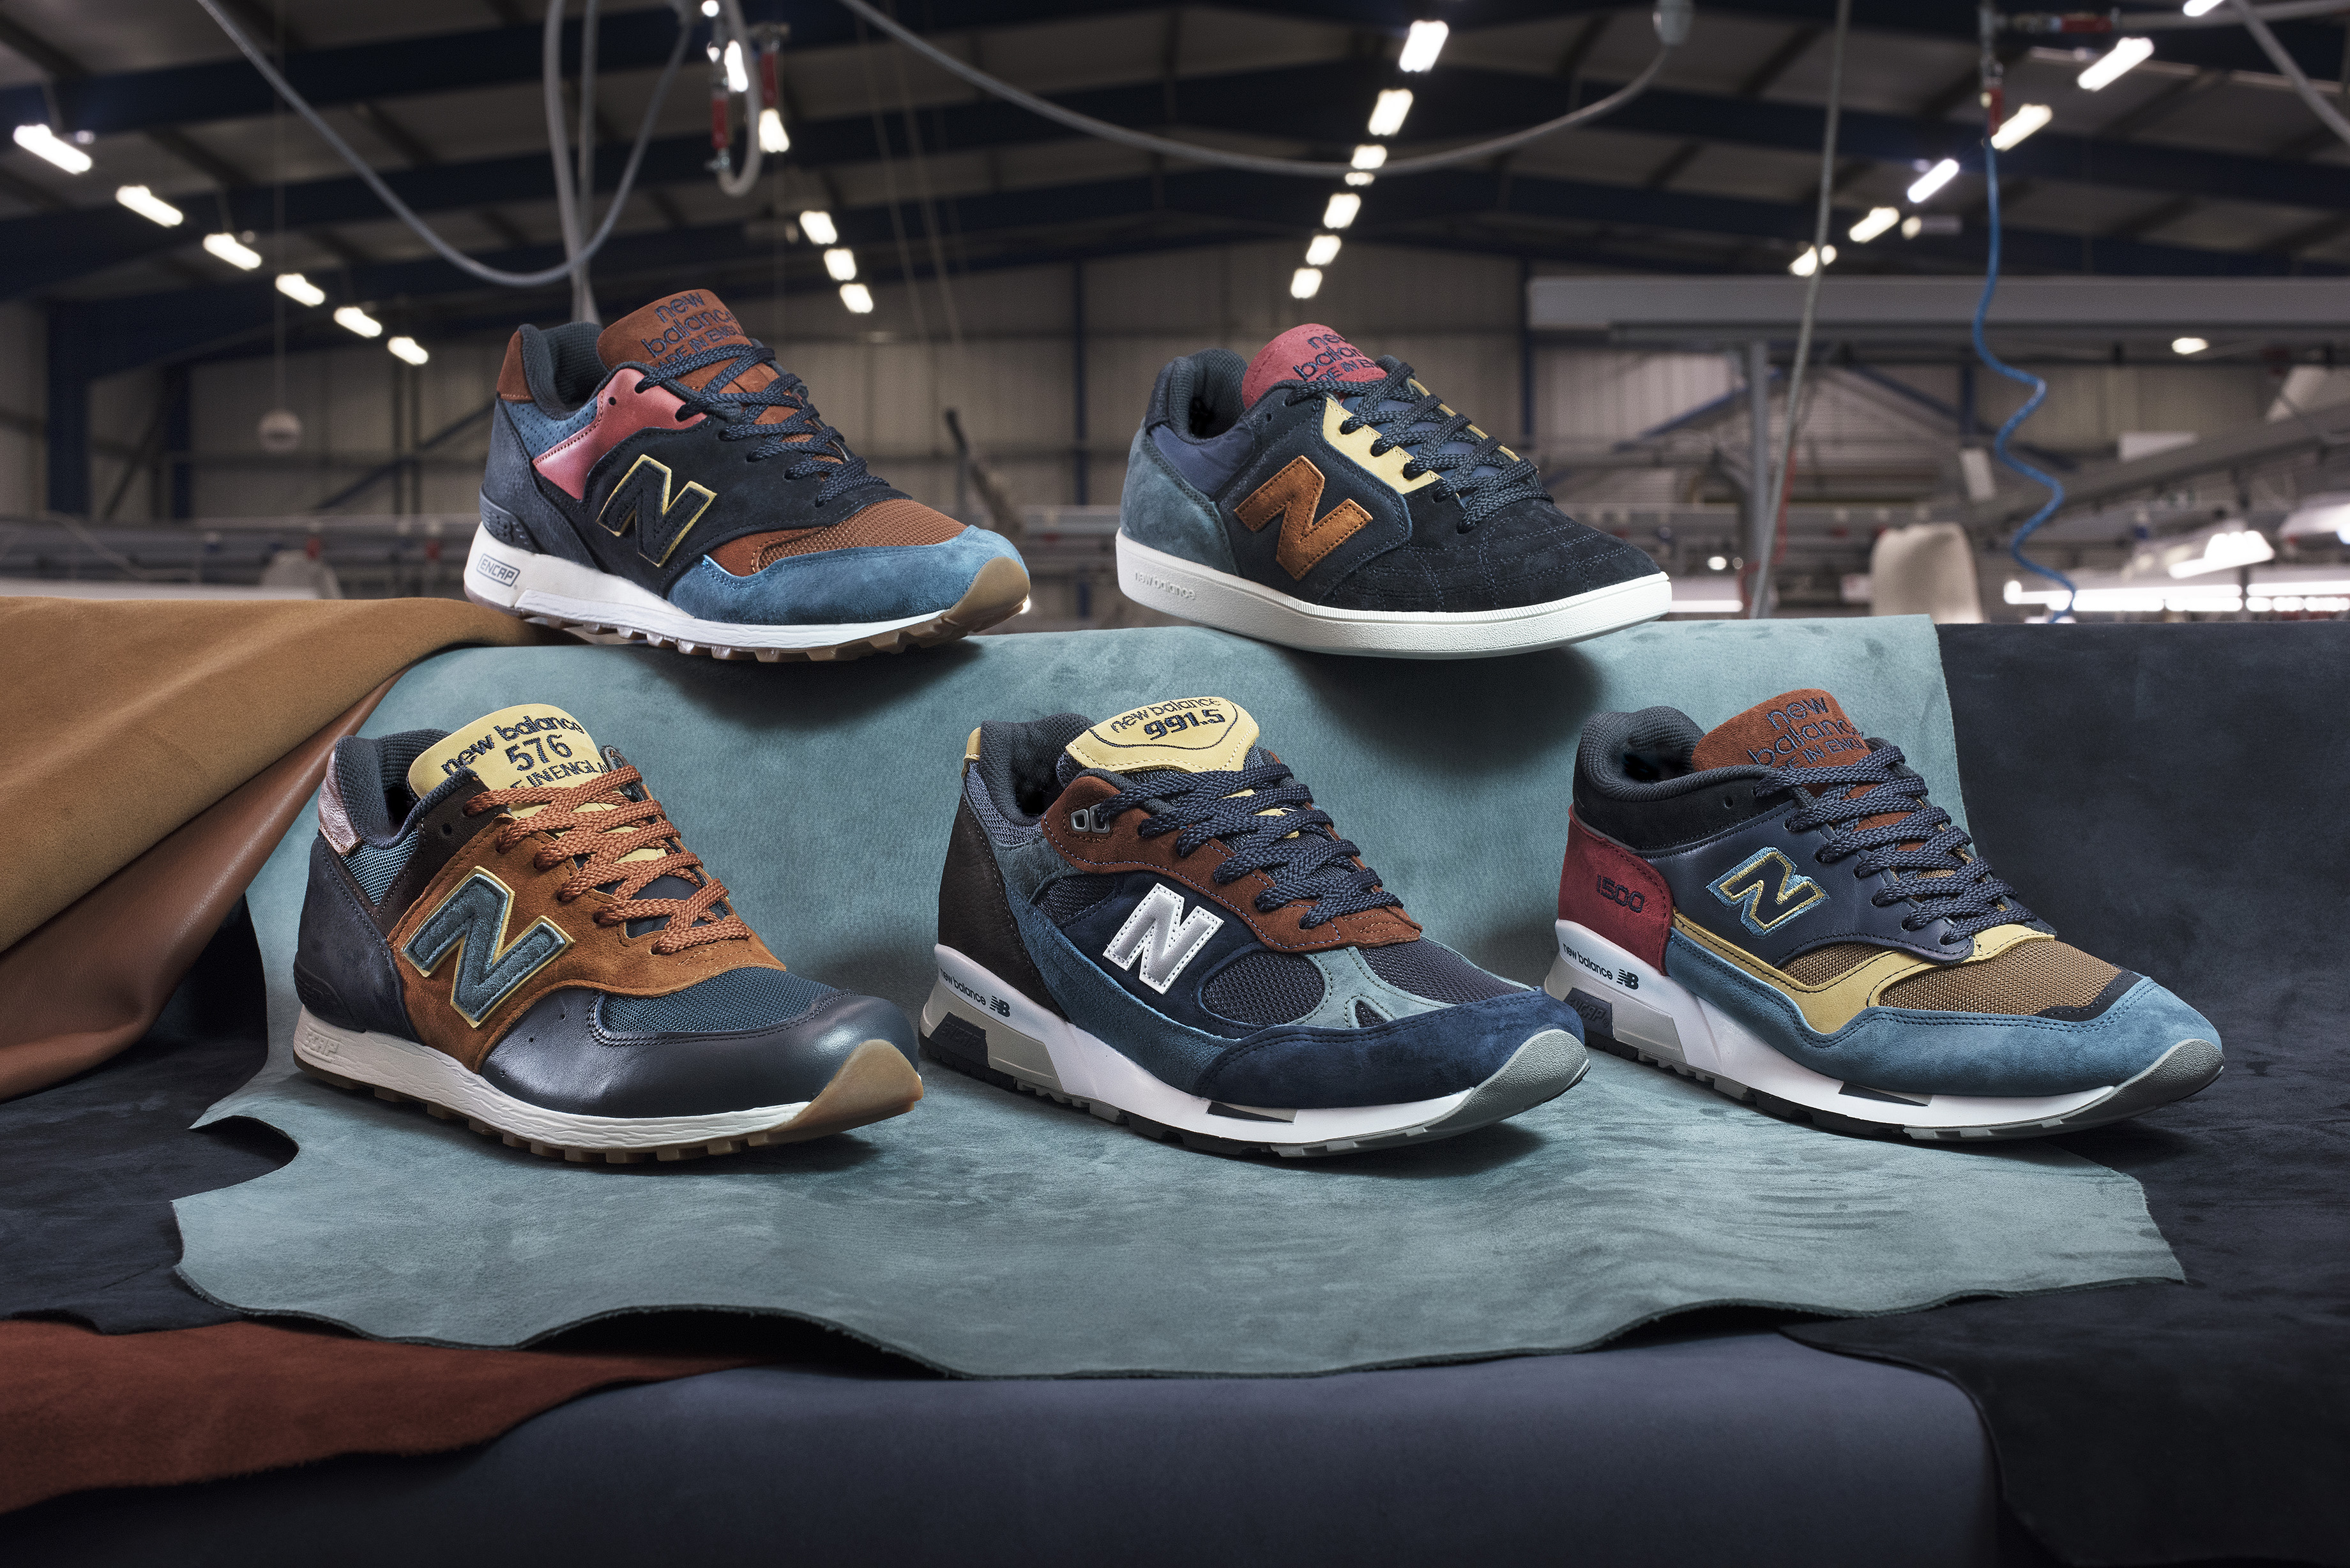 new balance m991 5yp limited edition made in england yard pack